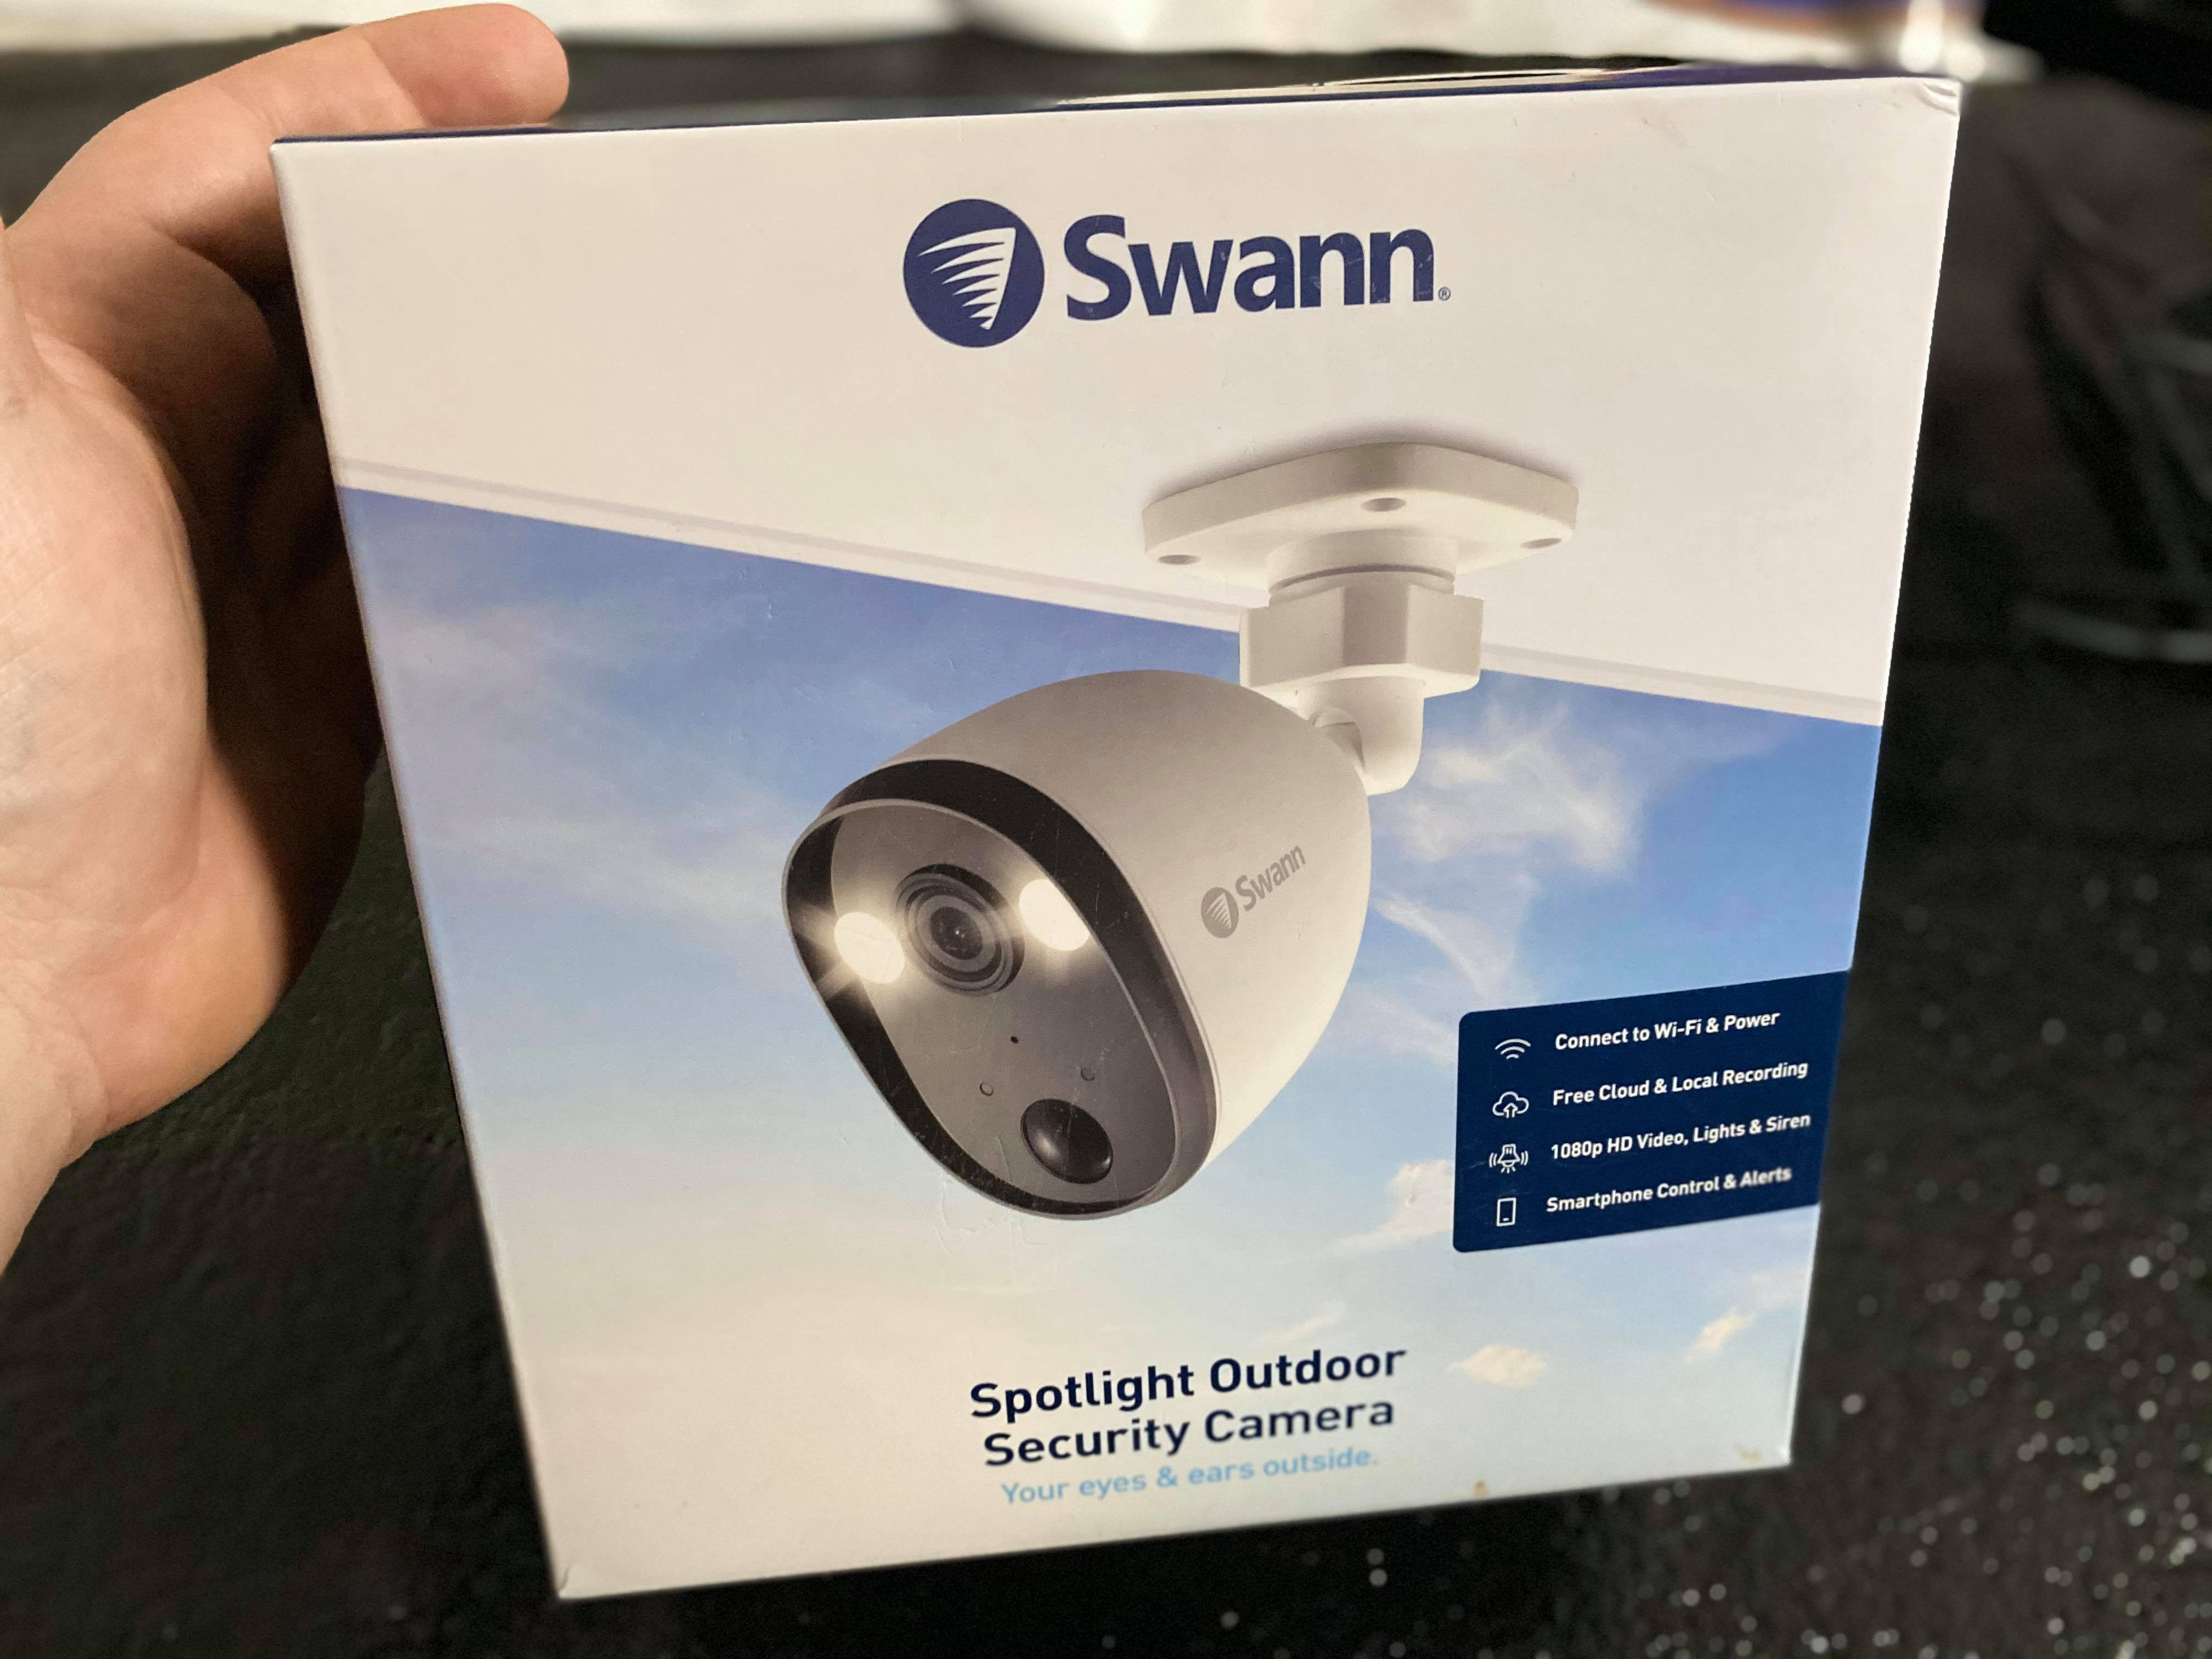 Spotlight Outdoor Security Camera Swann Review